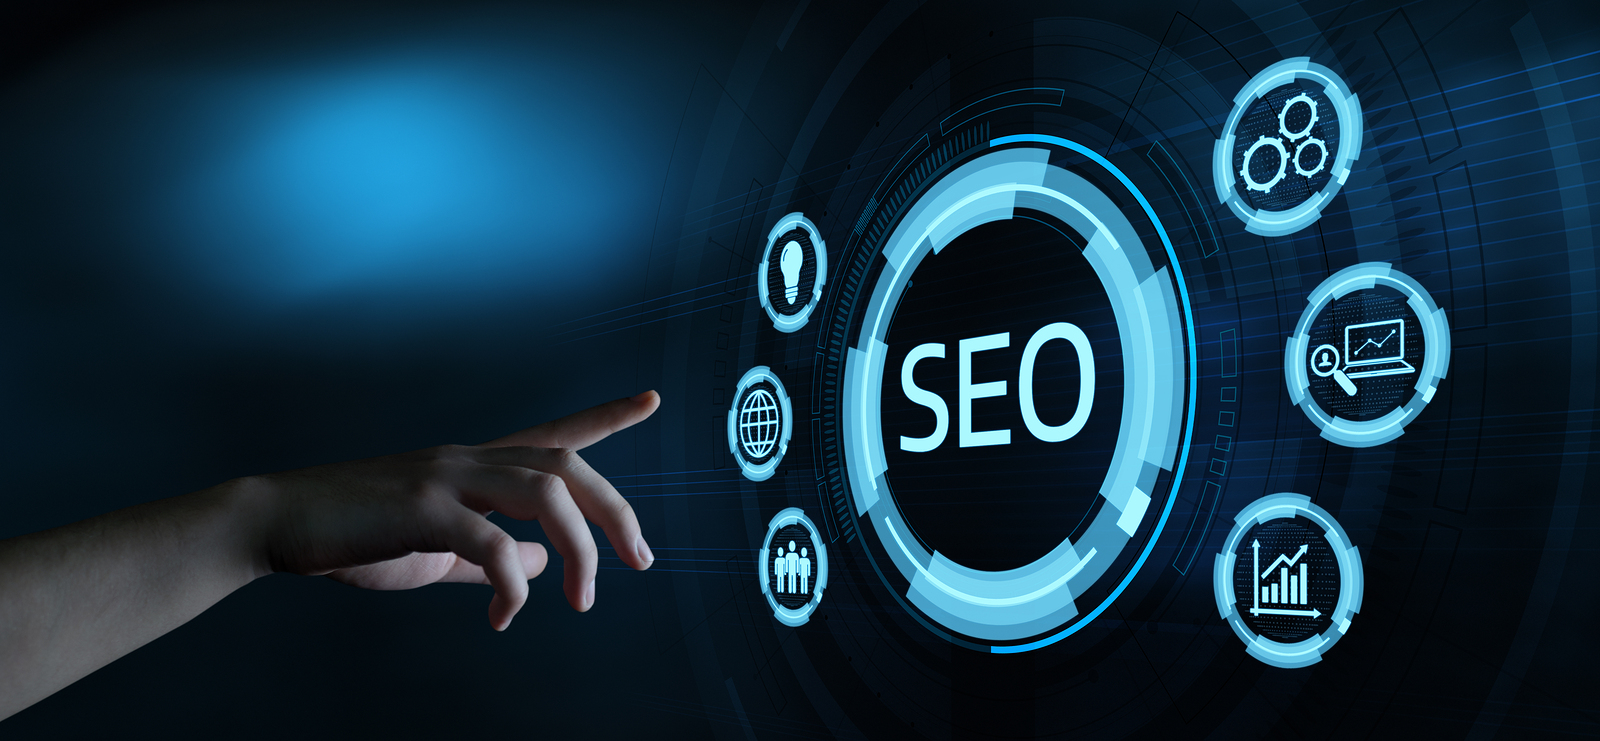 White Label SEO Services That Deliver Real Results